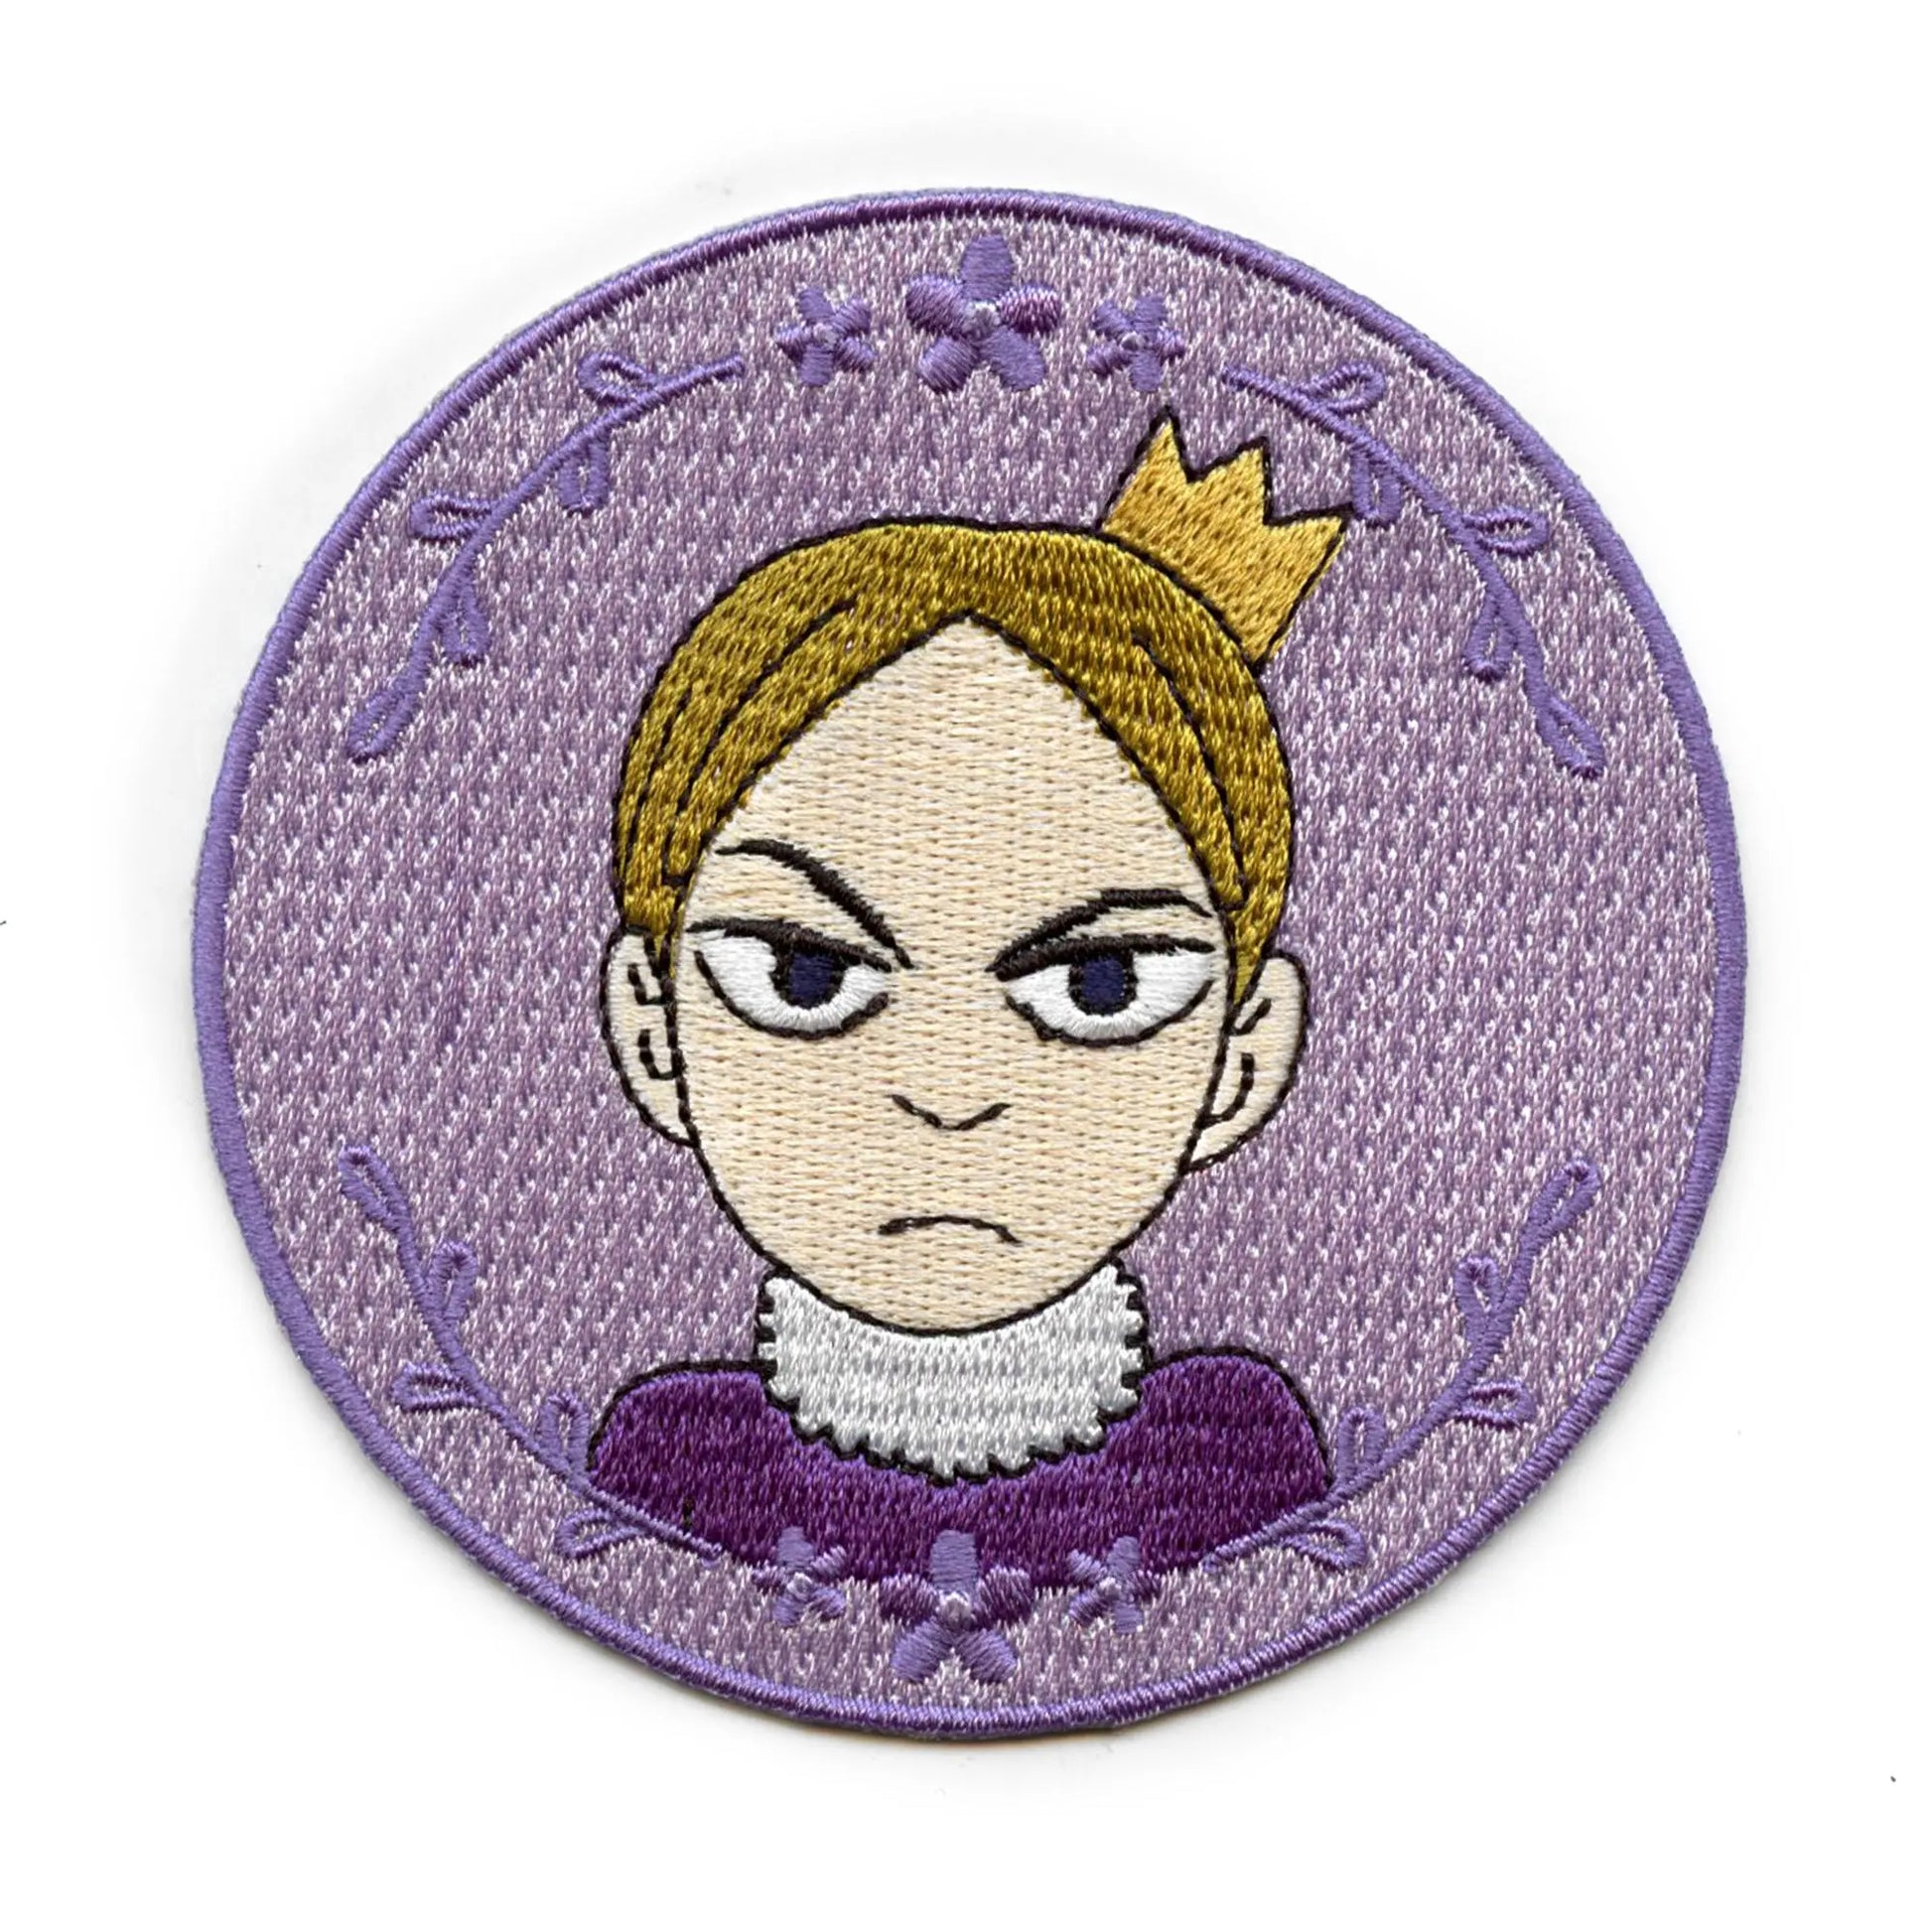 Ranking Of Kings Daida Patch Ranking Portrait Anime Embroidered Iron On